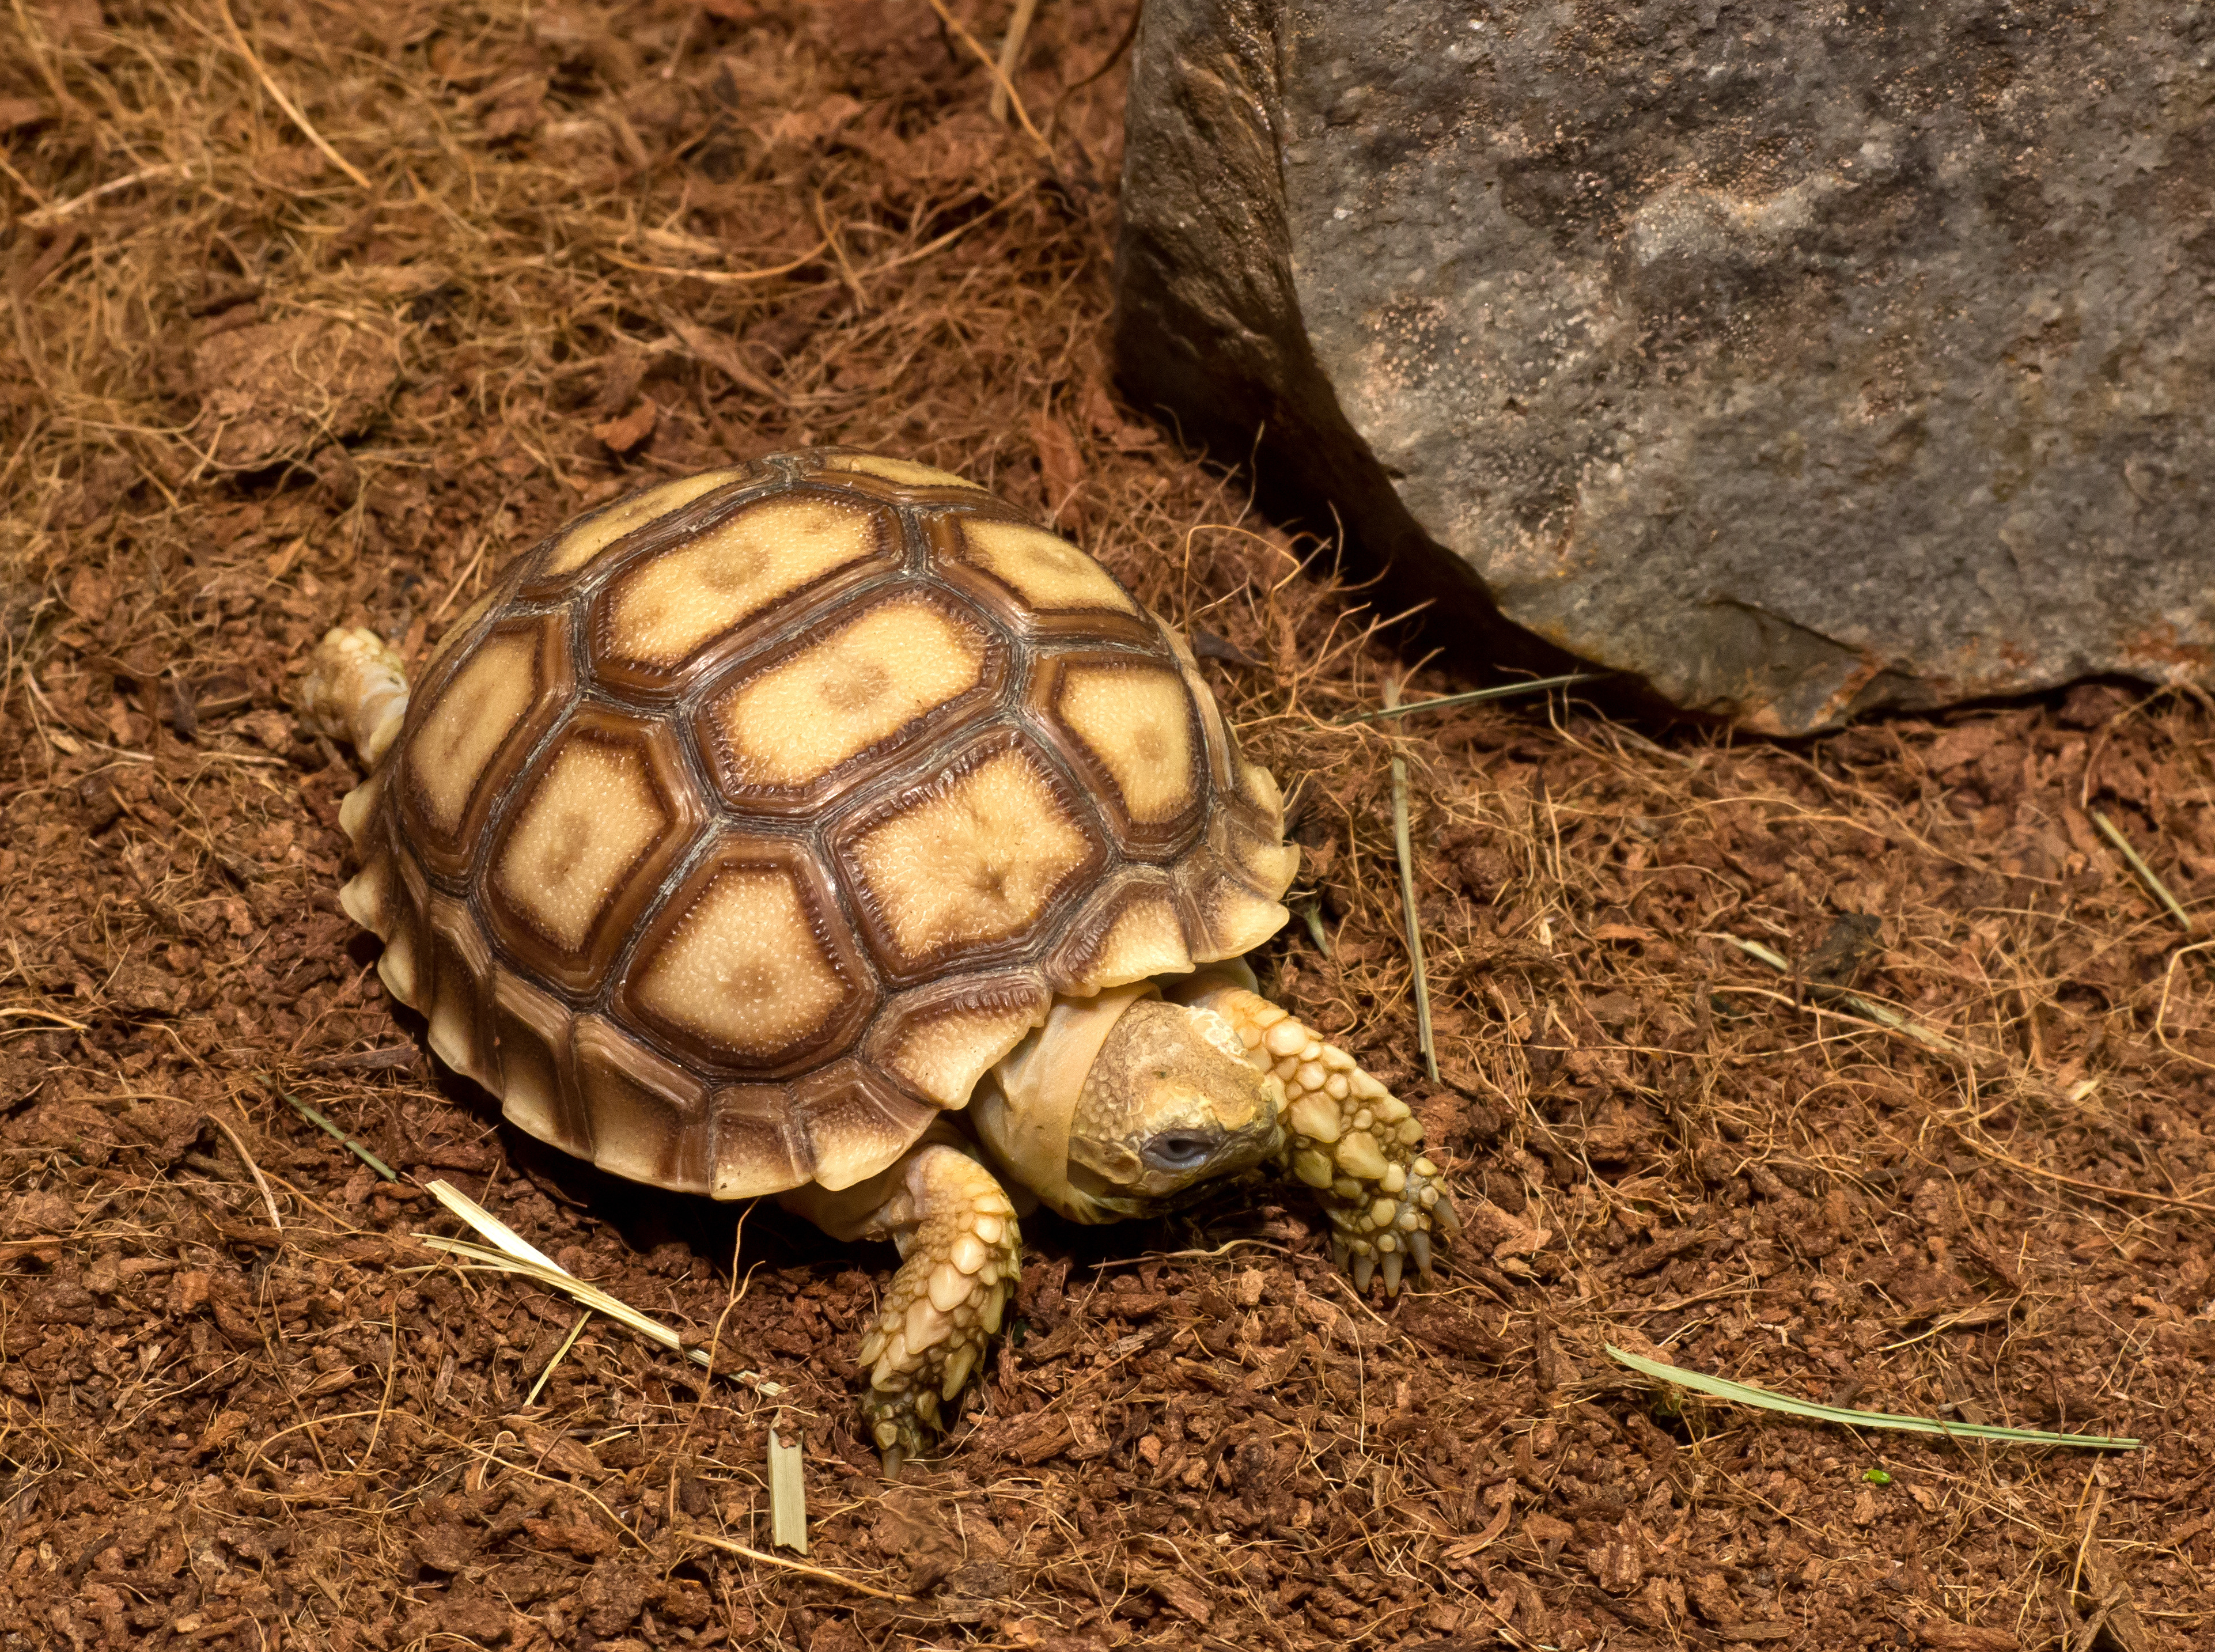 Can a cat and tortoise live together?